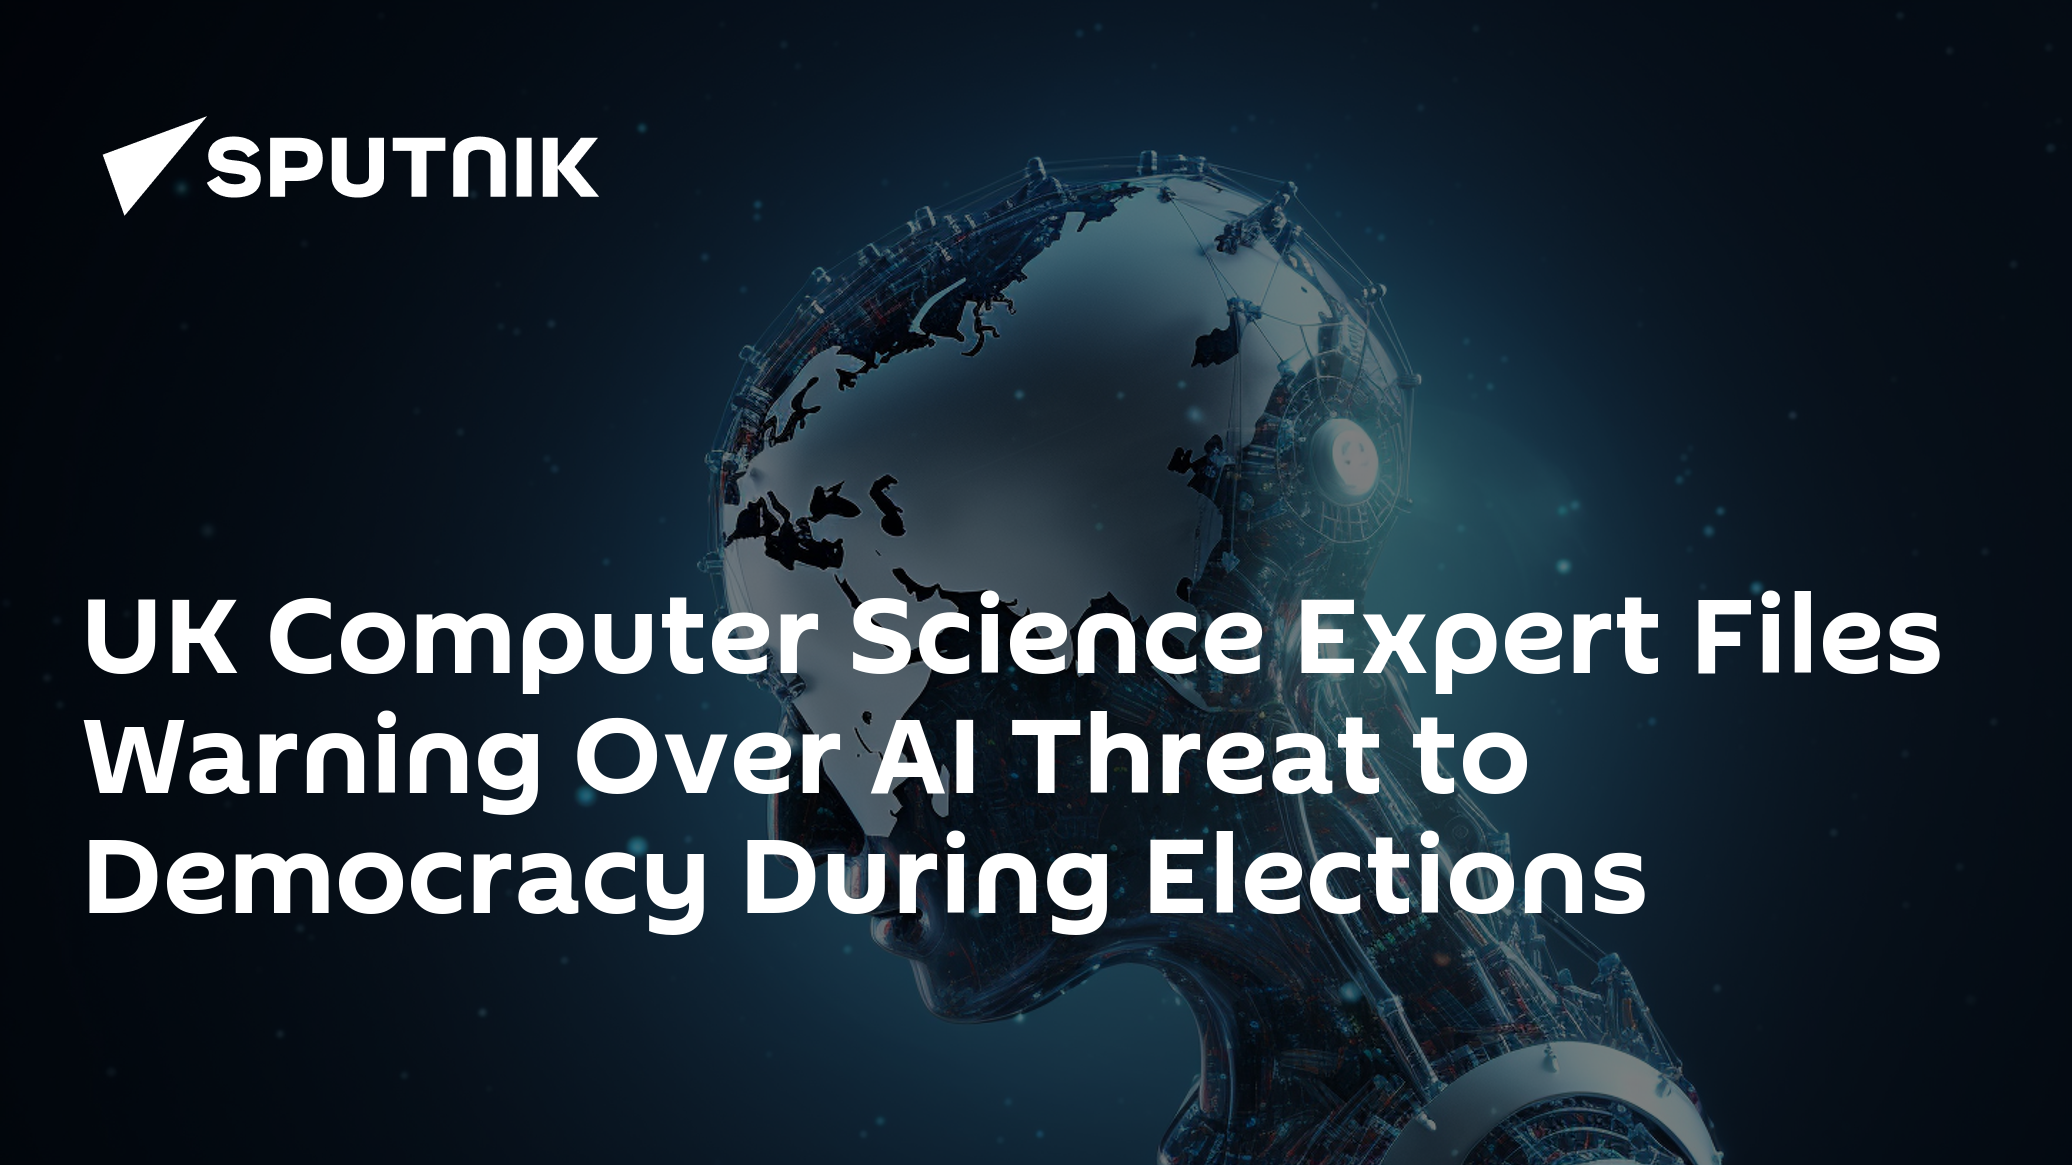 UK Computer Science Expert Files Warning Over AI Threat to Democracy During Elections